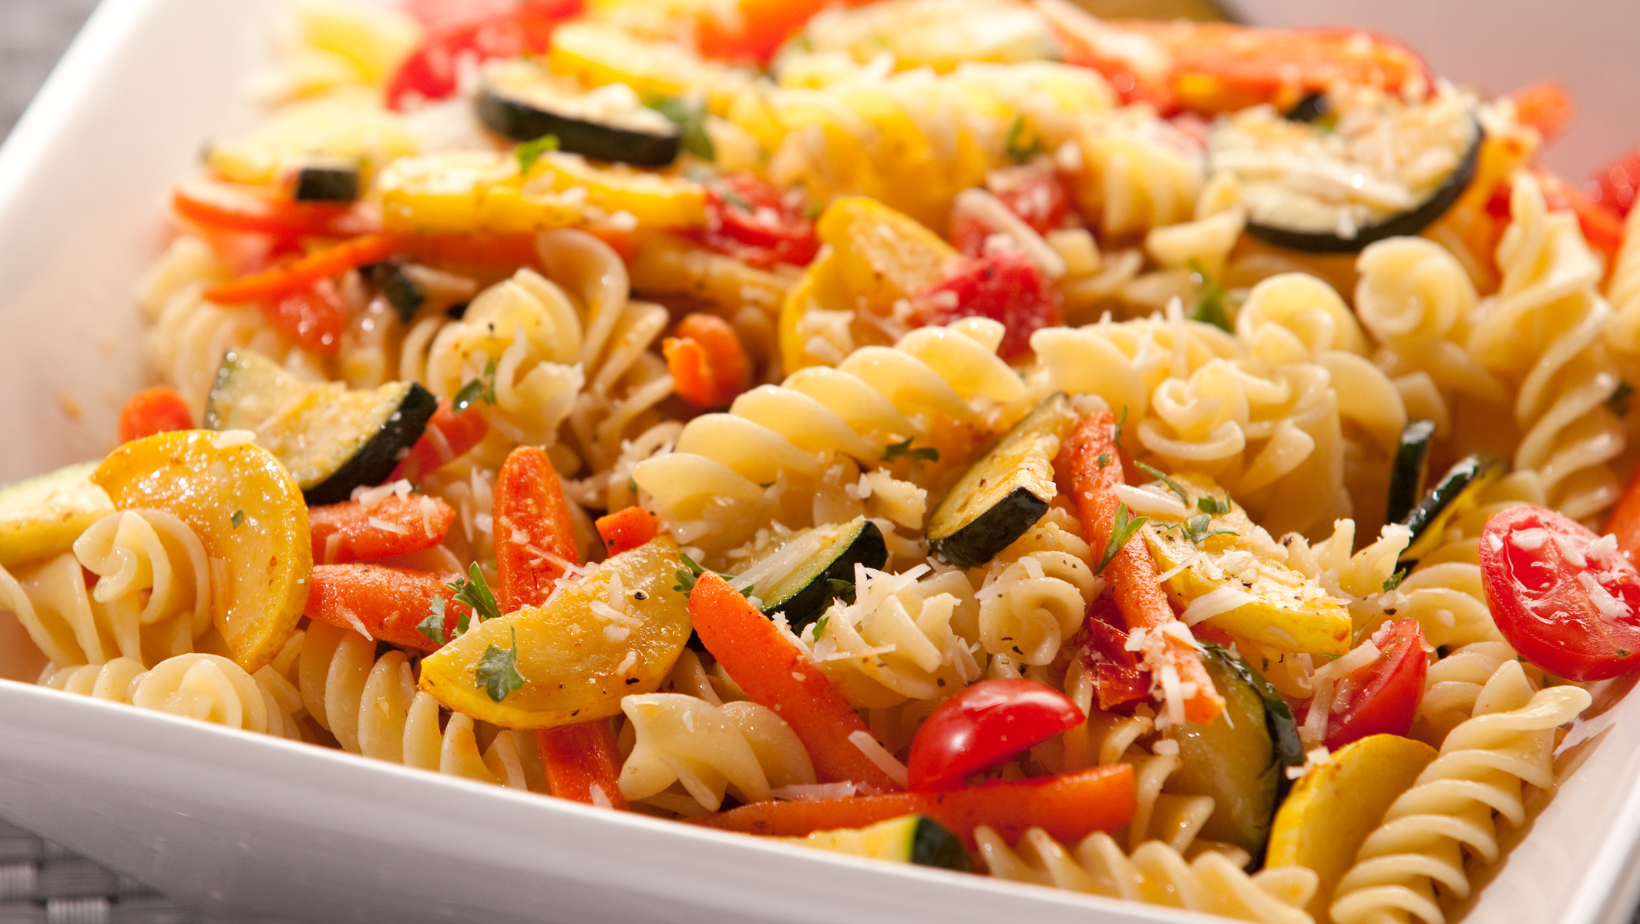 Recipe of the Month: Peppercorn Ranch Pasta